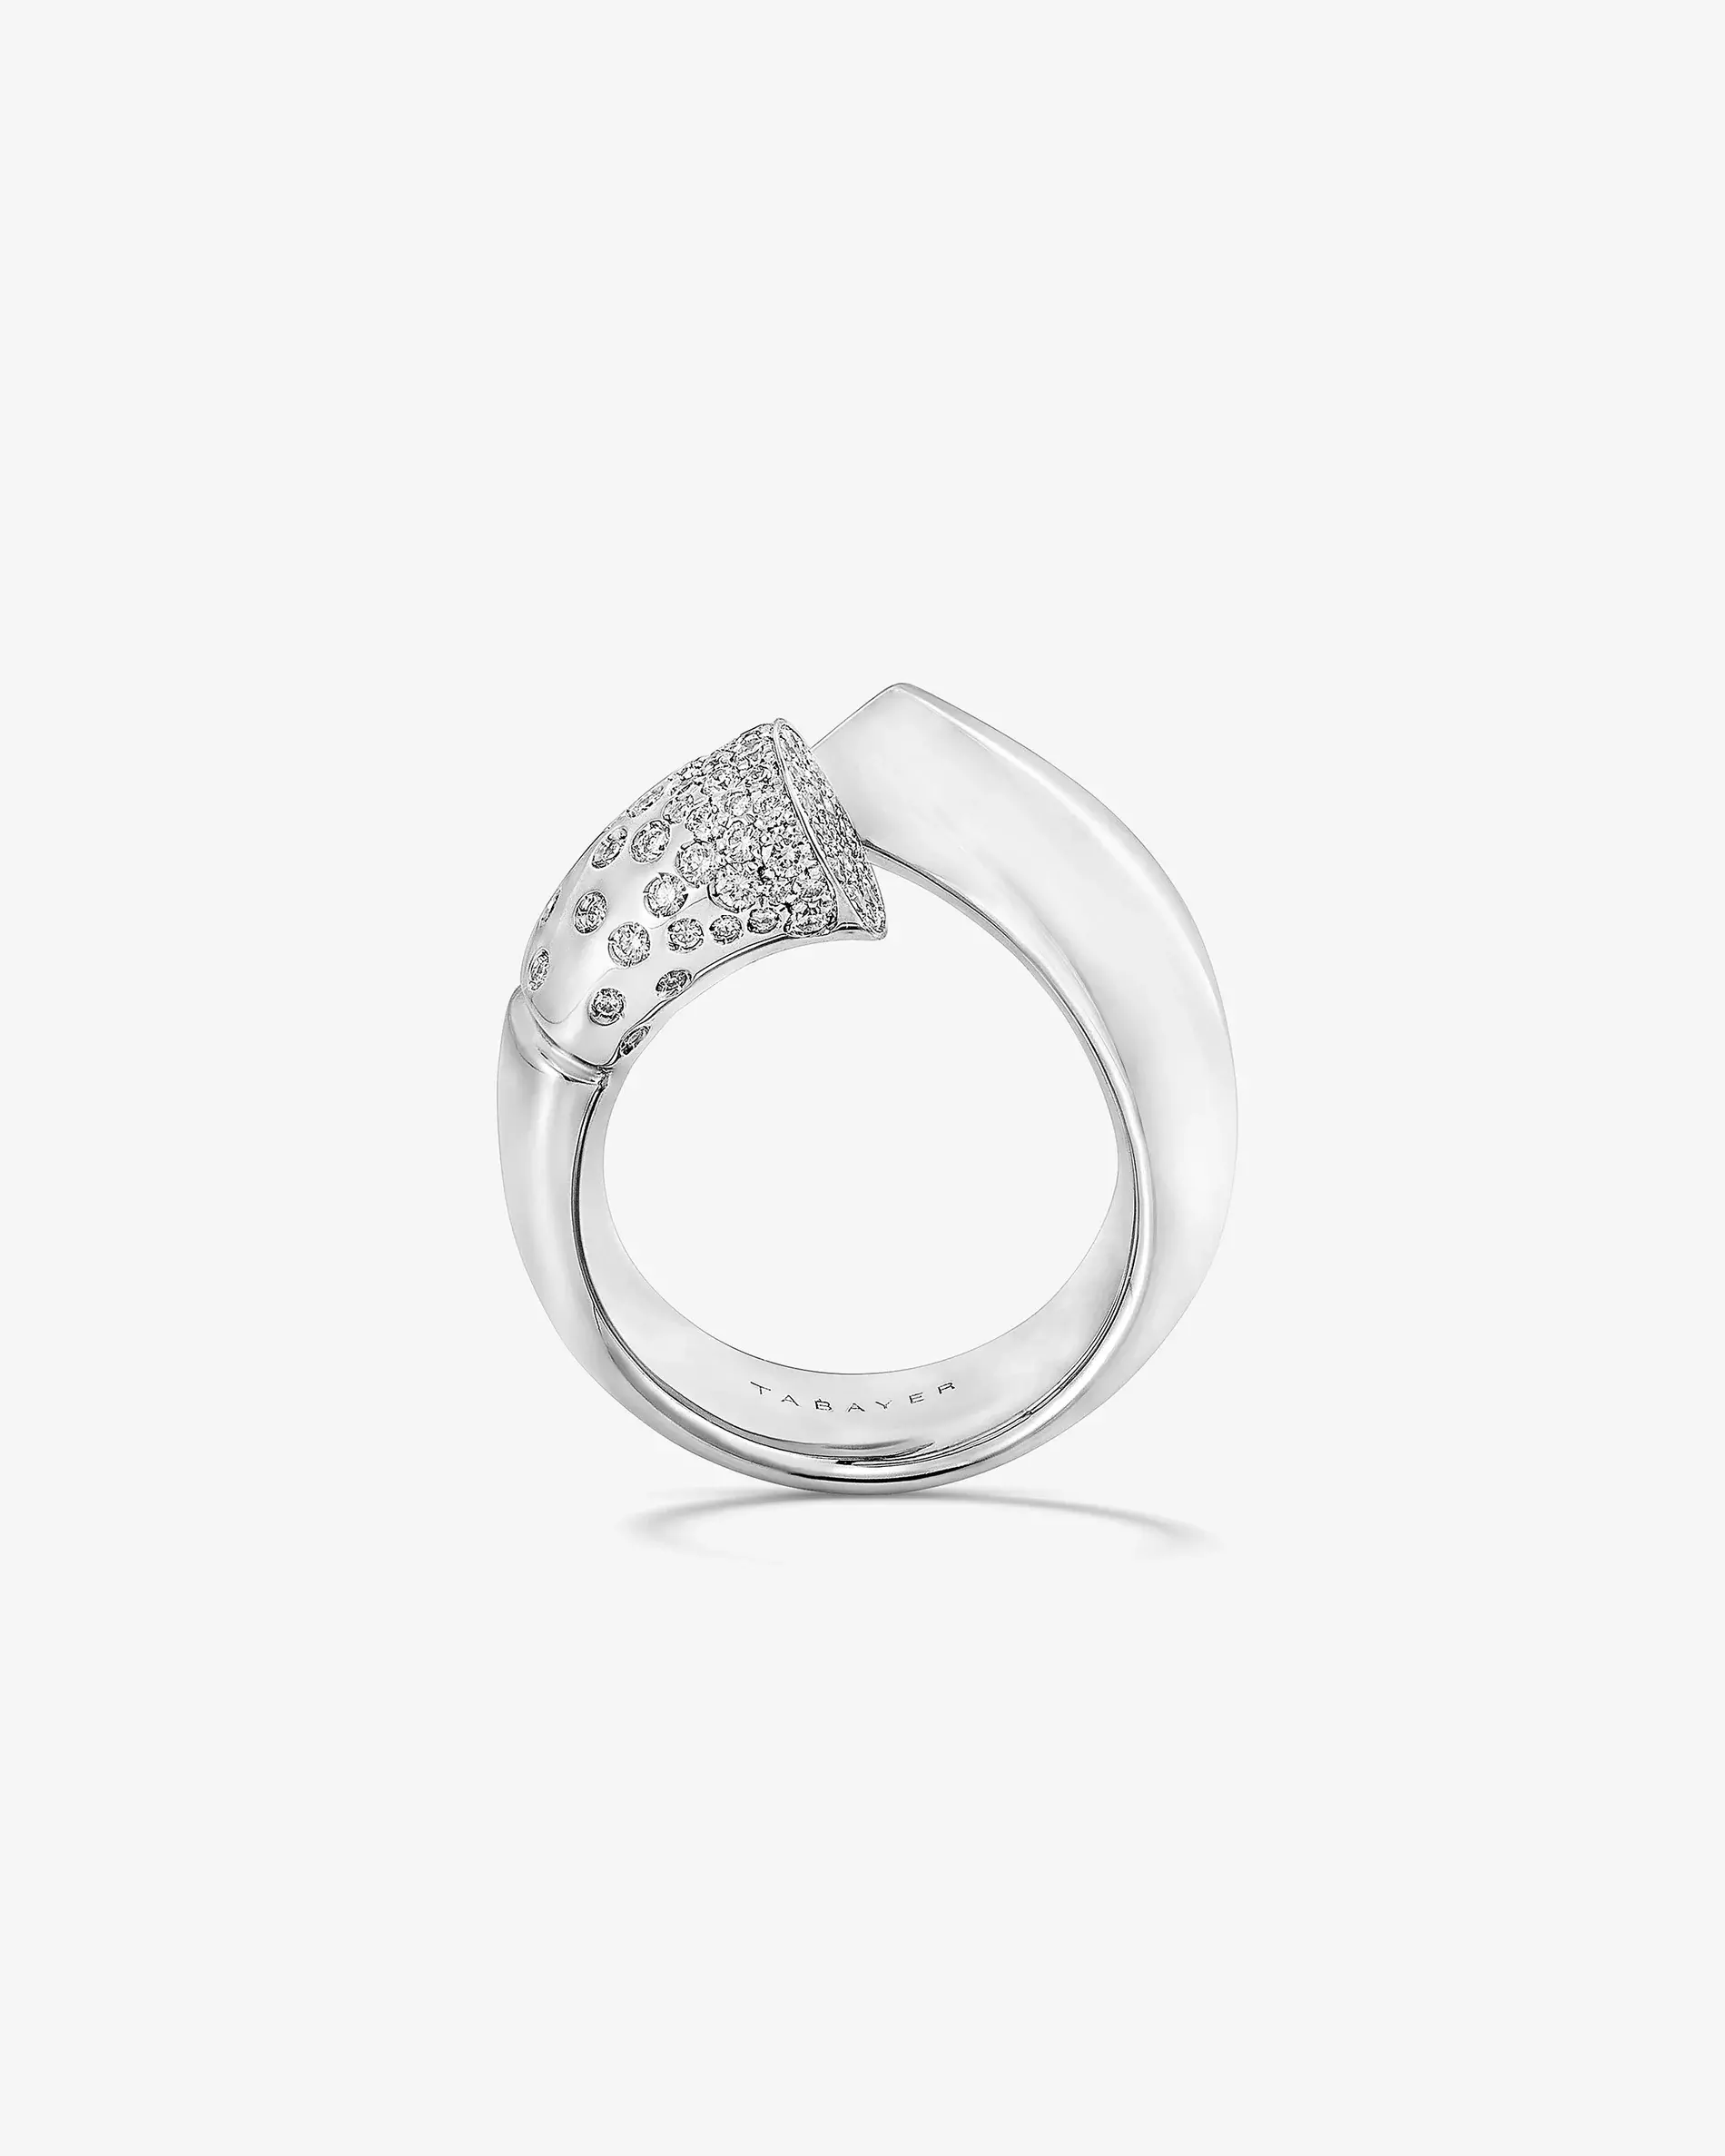 Tabayer Oera Ring In White Gold Paved With Diamonds Large Version